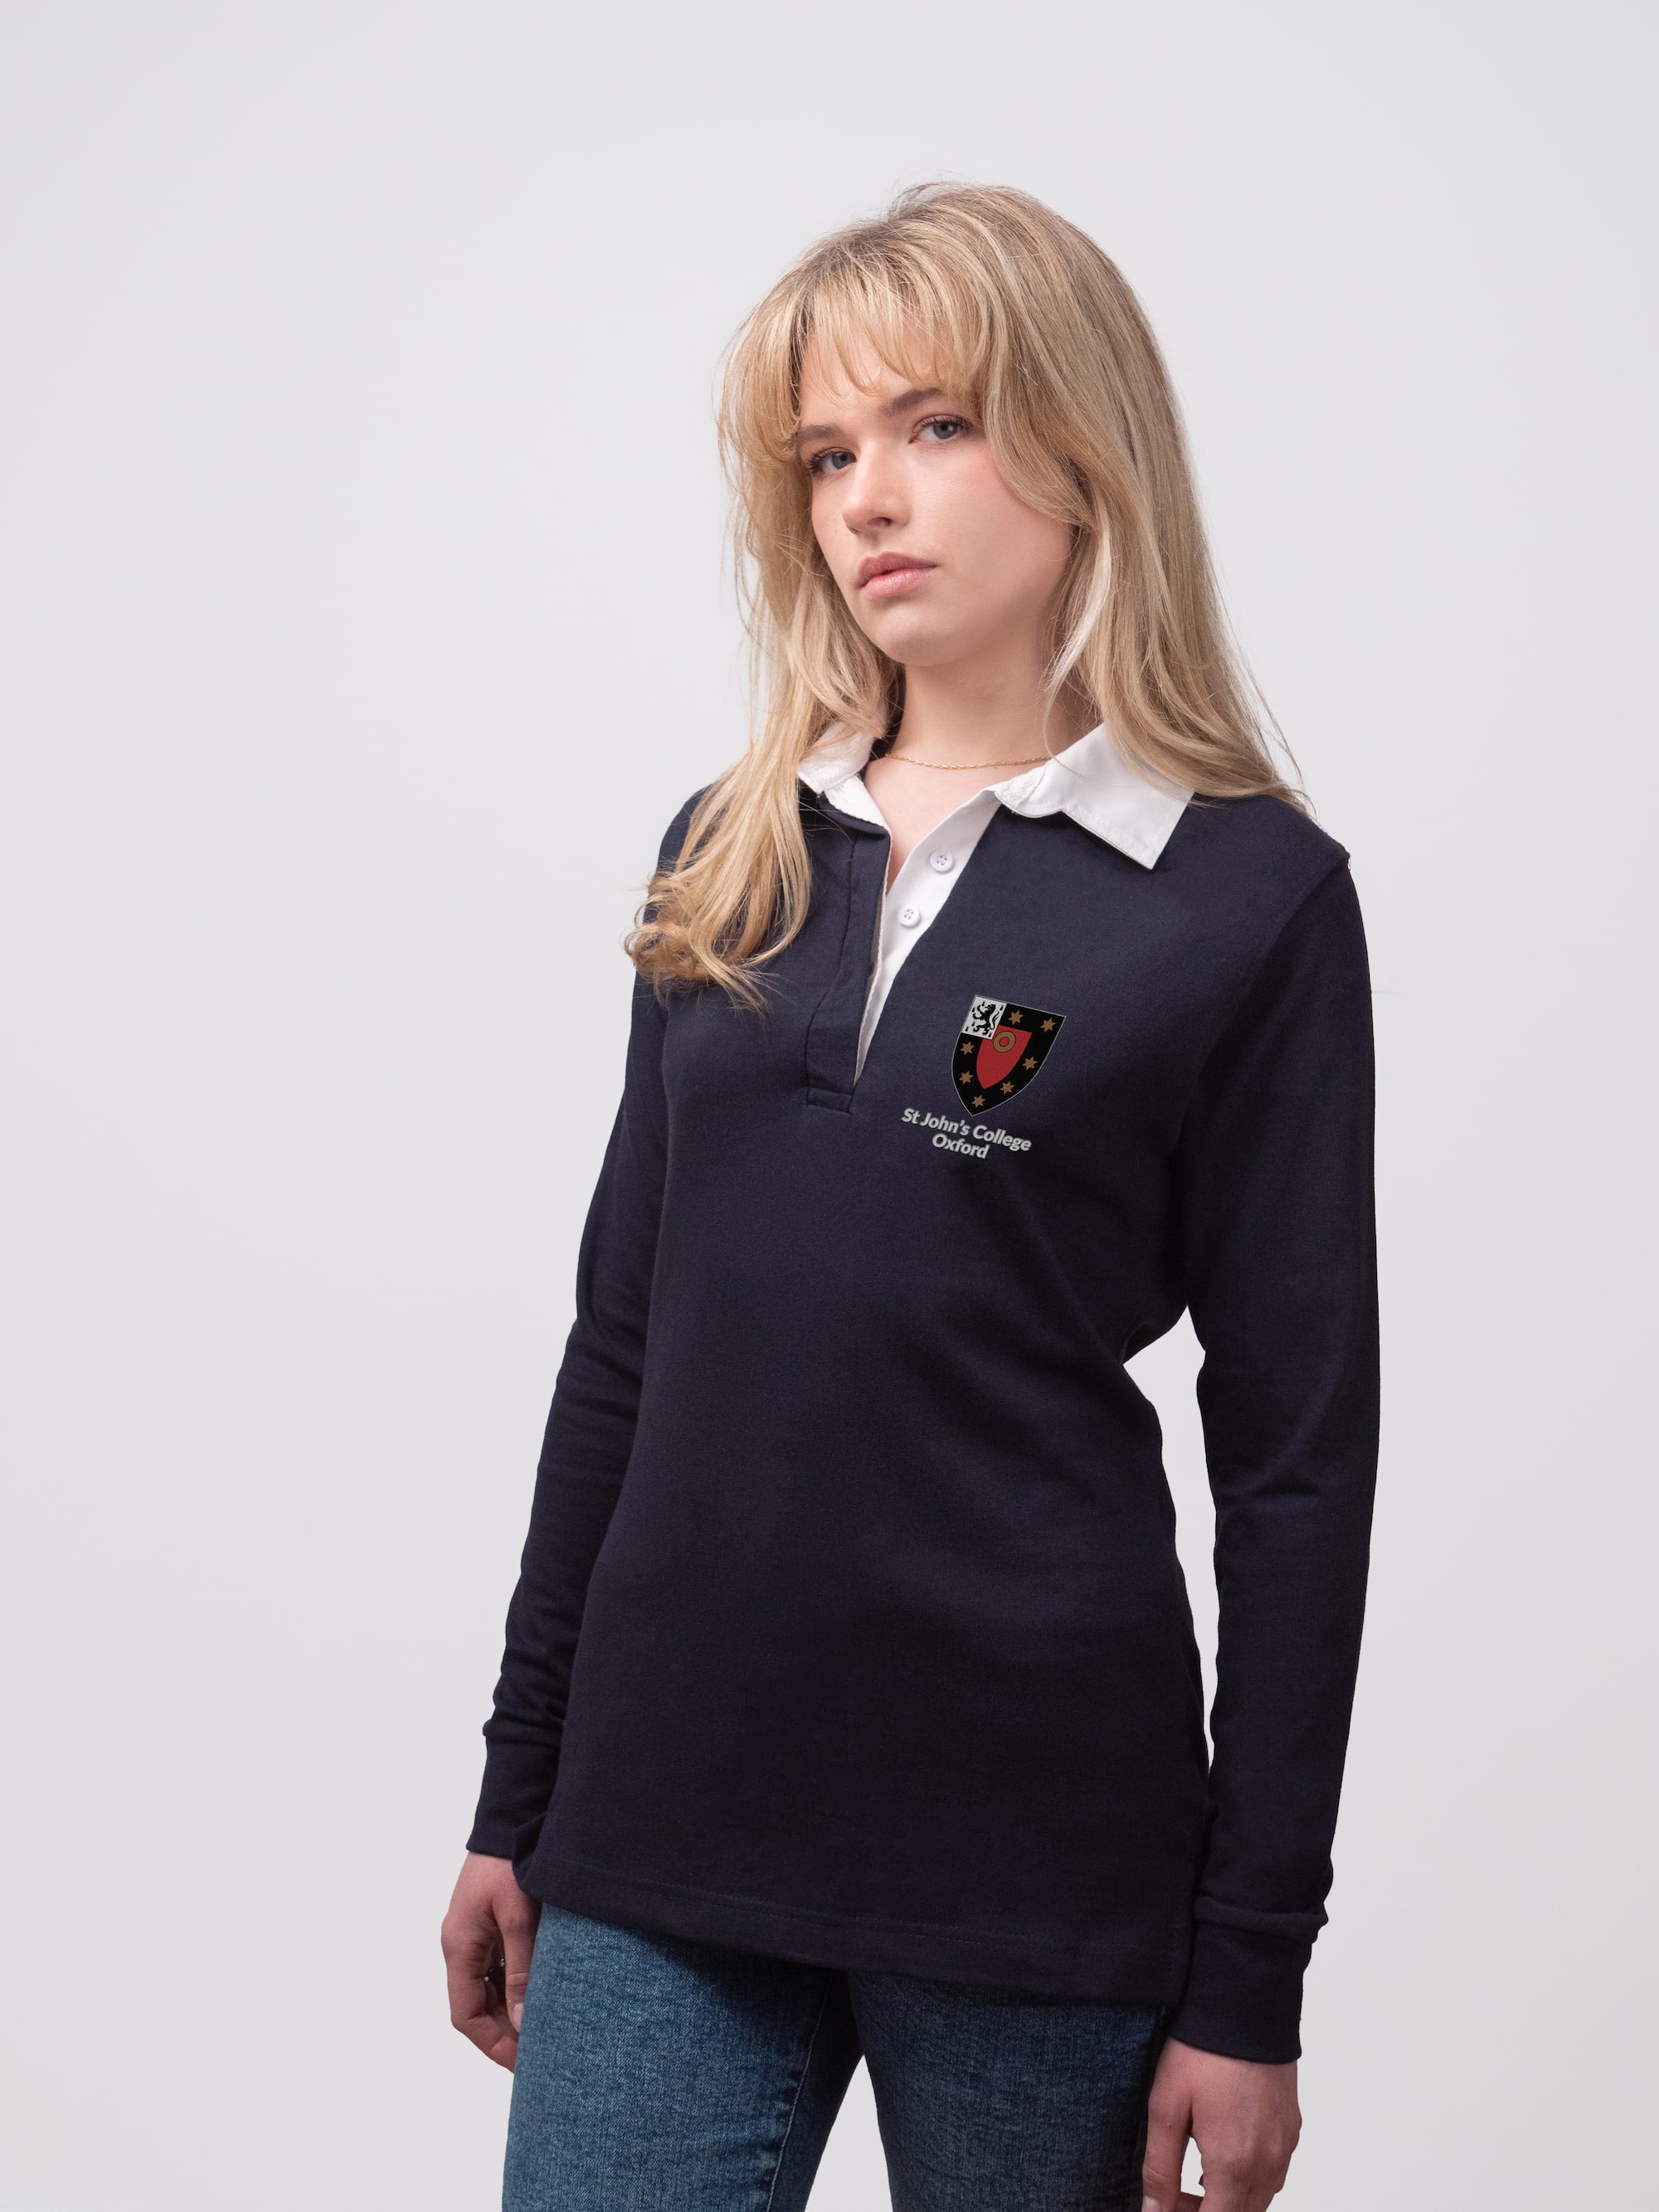 St John's College Oxford JCR Classic Ladies Rugby Shirt